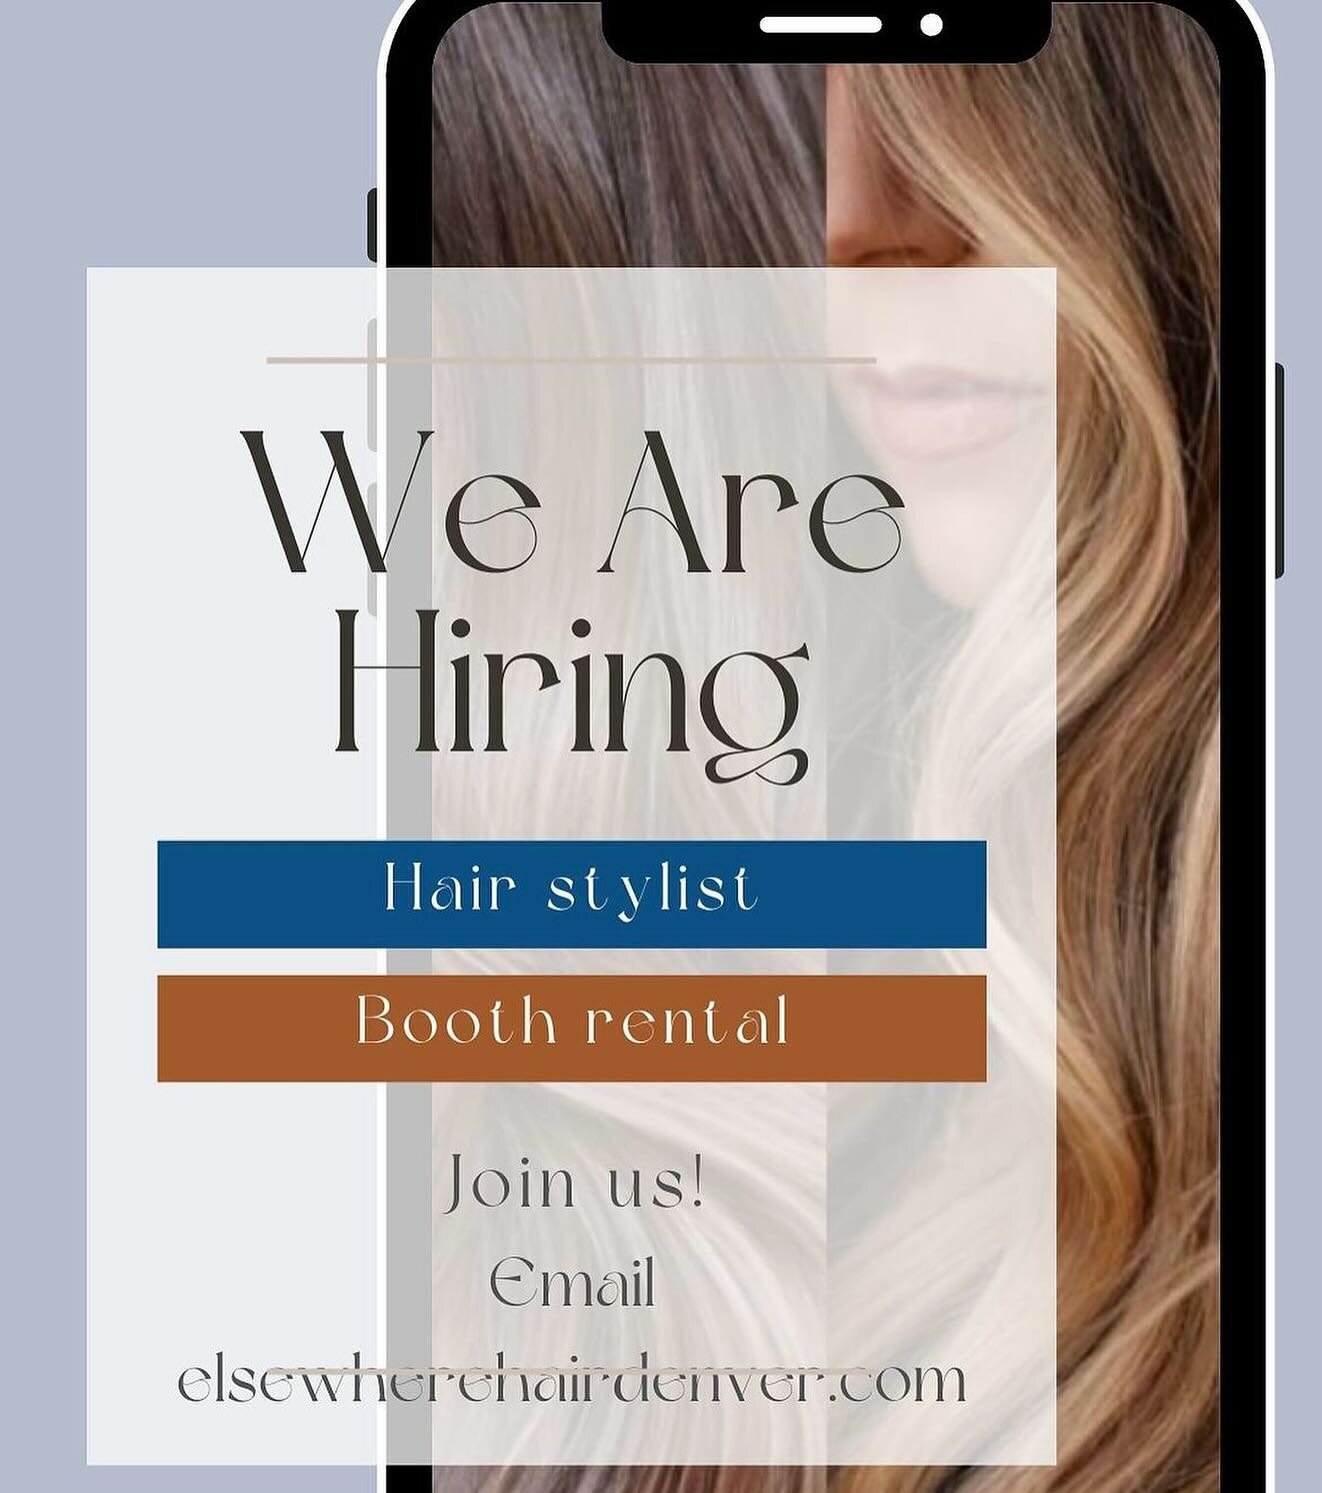 ✨Come join our salon family!
We are seeking a talented hairstylist! We look forward to hearing from you!
Email us at elsewherehairdenver.com

✨We&rsquo;re looking for an ambitious individual skilled in a variety of color services, and in hair extensi